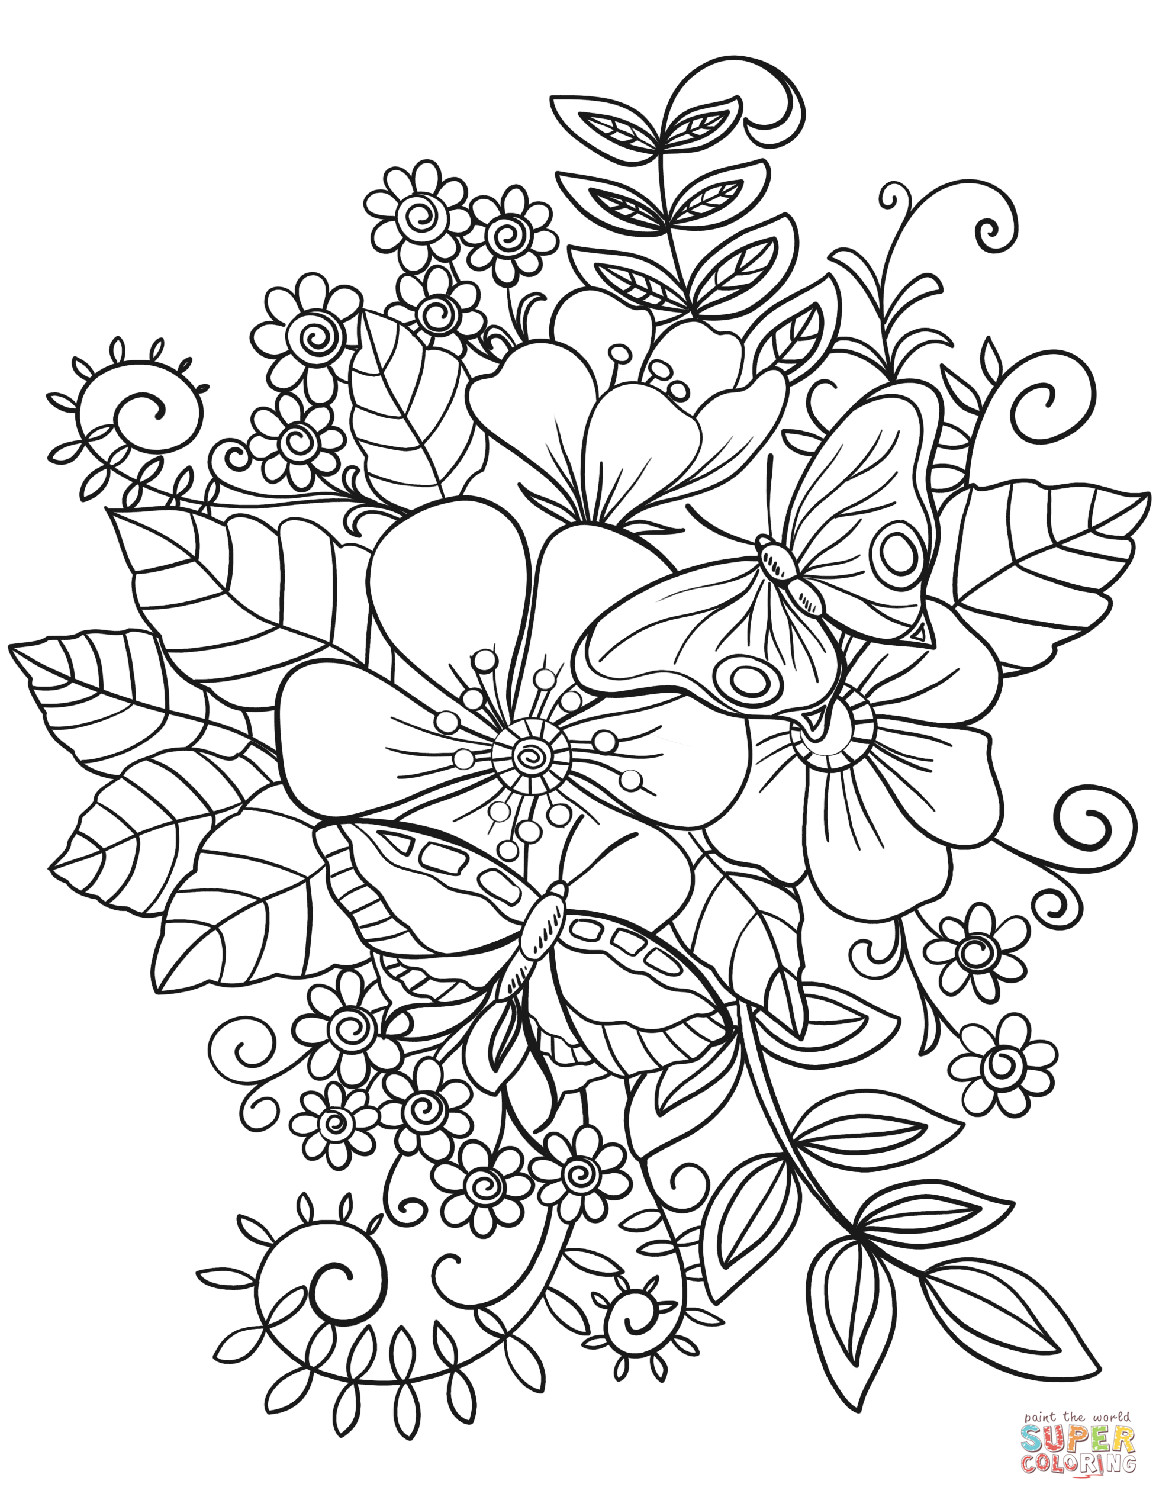 Free Printable Coloring Pages Of Flowers
 Butterflies on Flowers coloring page